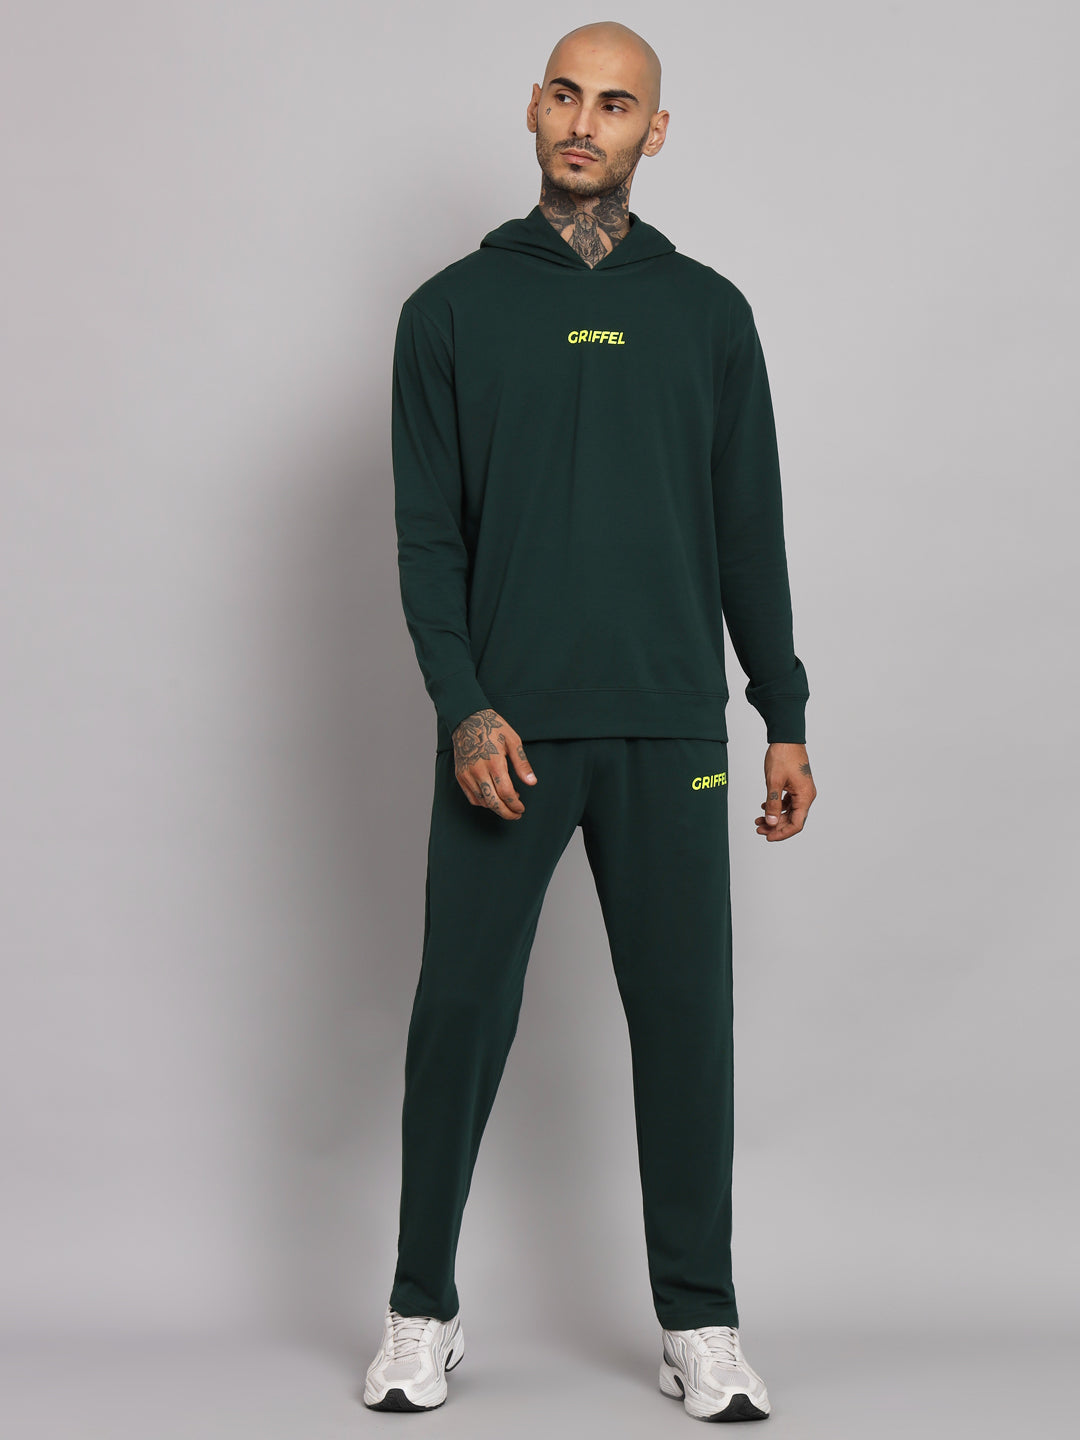 Griffel Men's Pre Winter Front Logo Solid Cotton Basic Hoodie and Joggers Full set Green Tracksuit - griffel